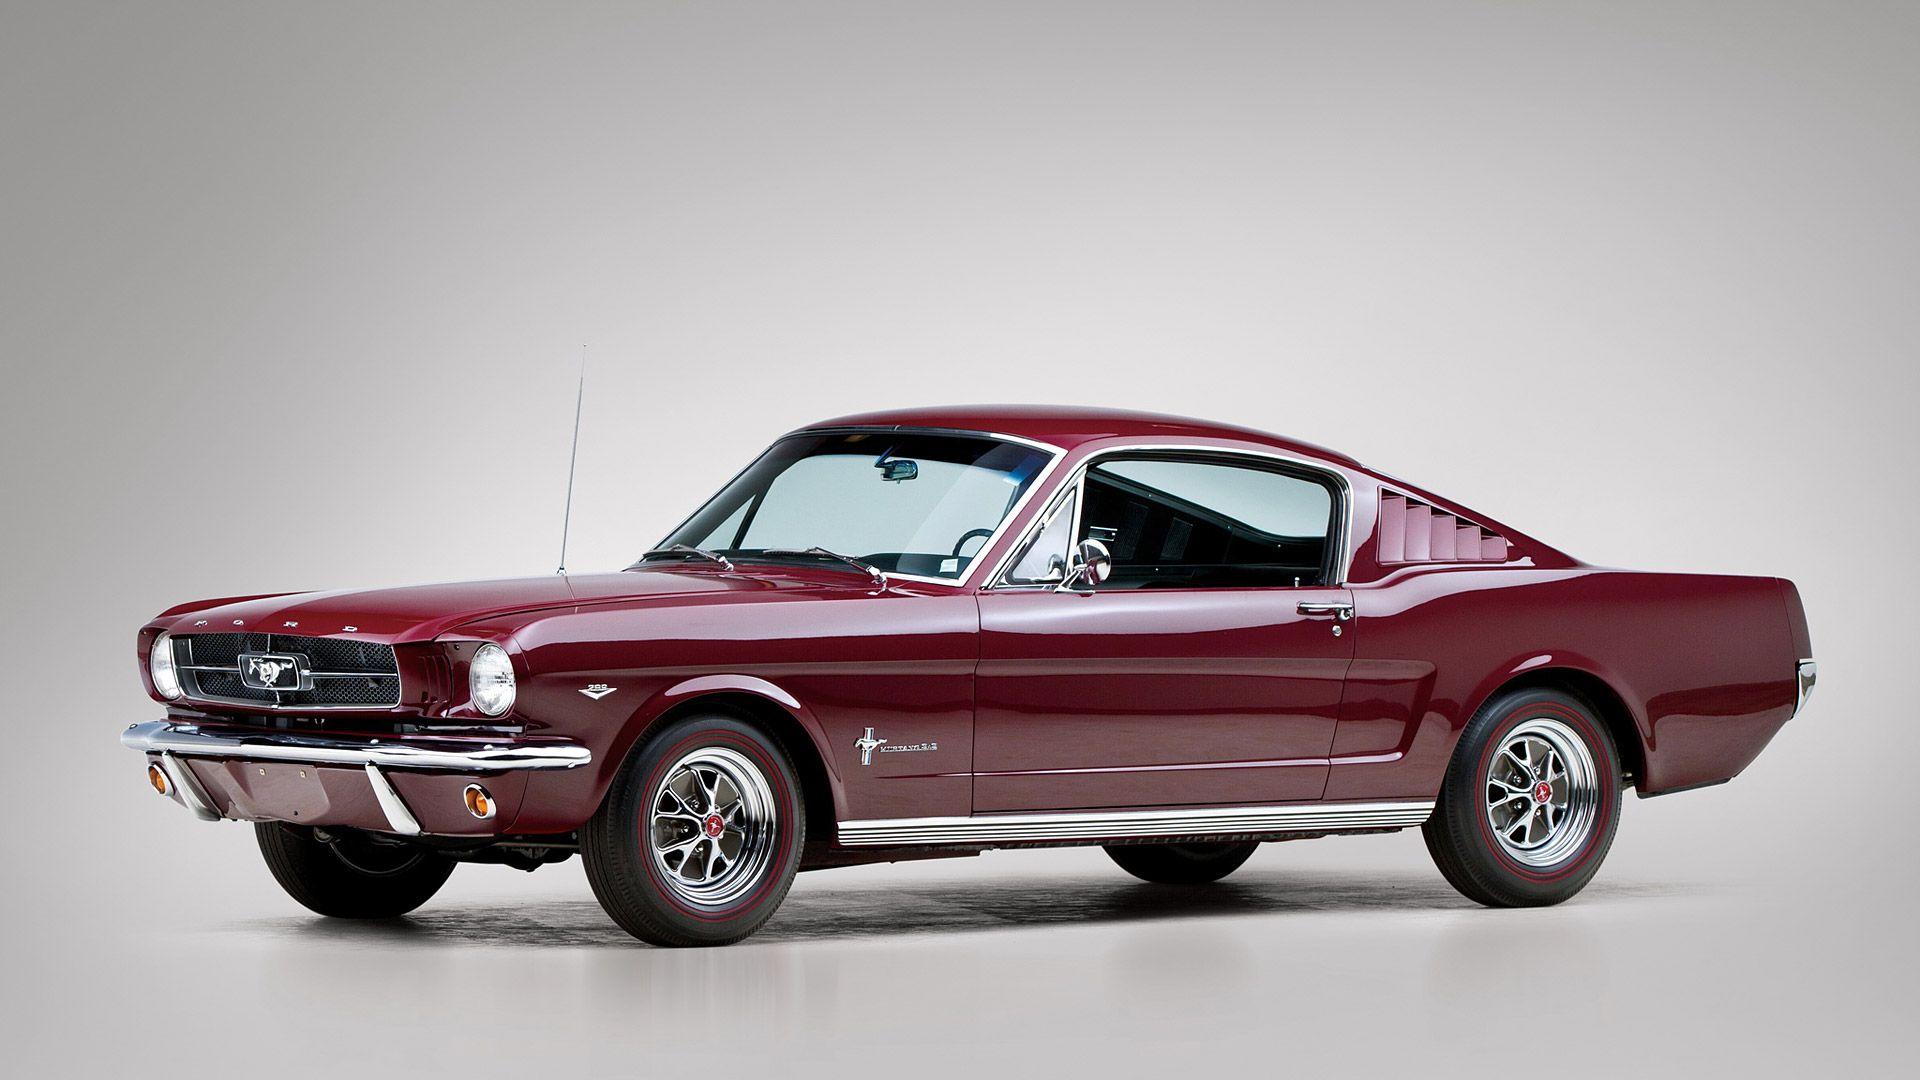 Ford Mustang Fastback Wallpaper & HD Image